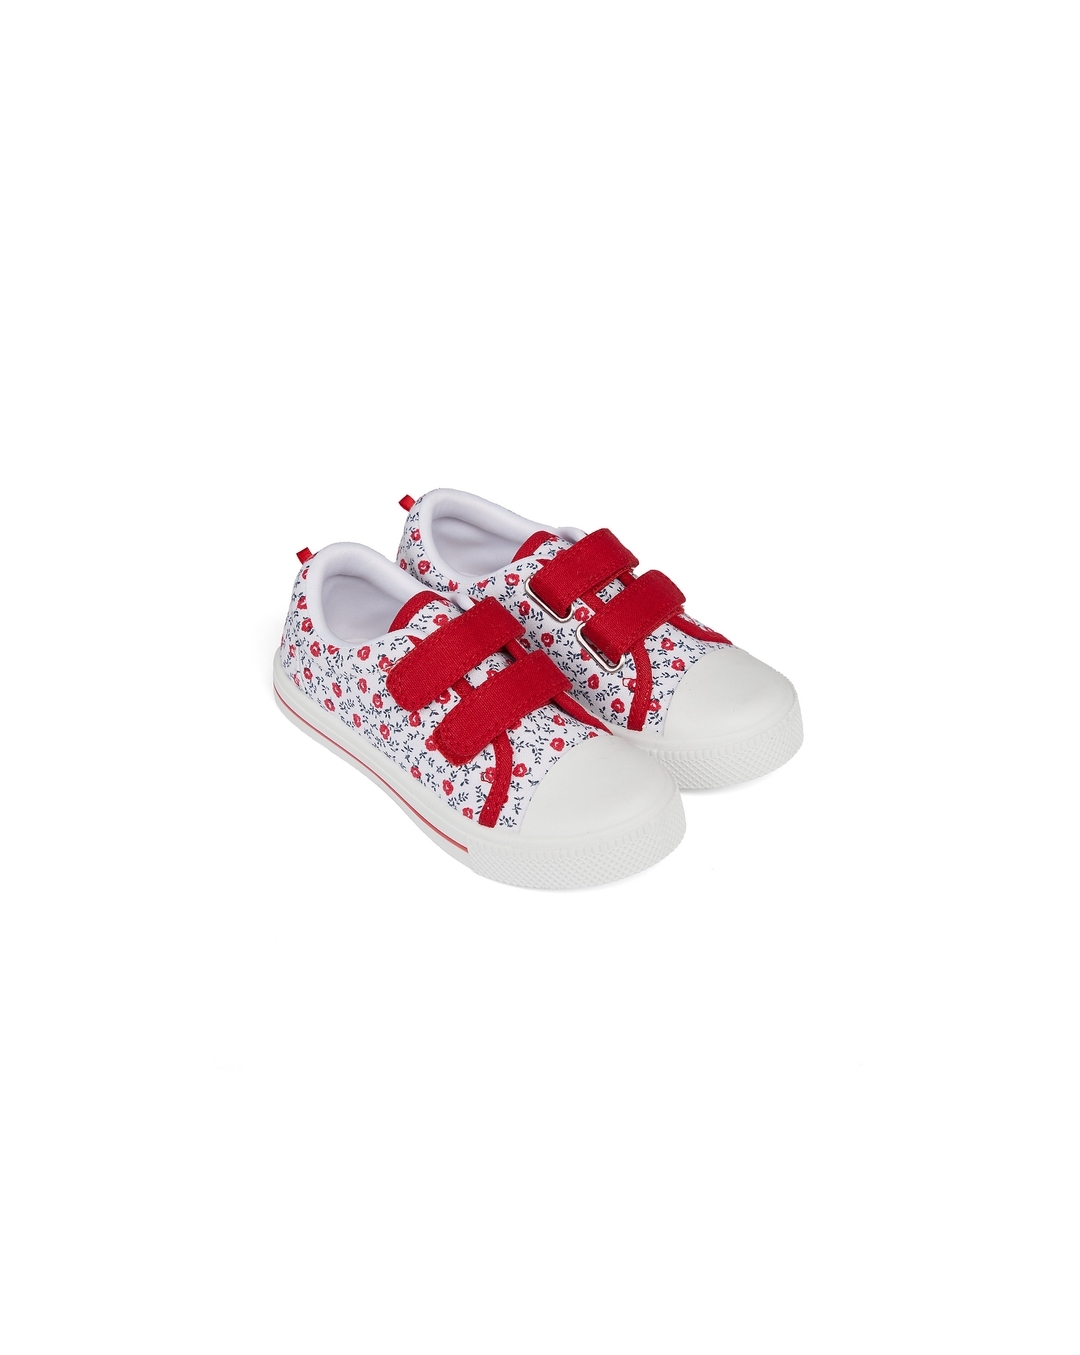 K KomForme Toddler Sneakers Girls and Boys Slip On Shoes Off White :  Amazon.in: Shoes & Handbags